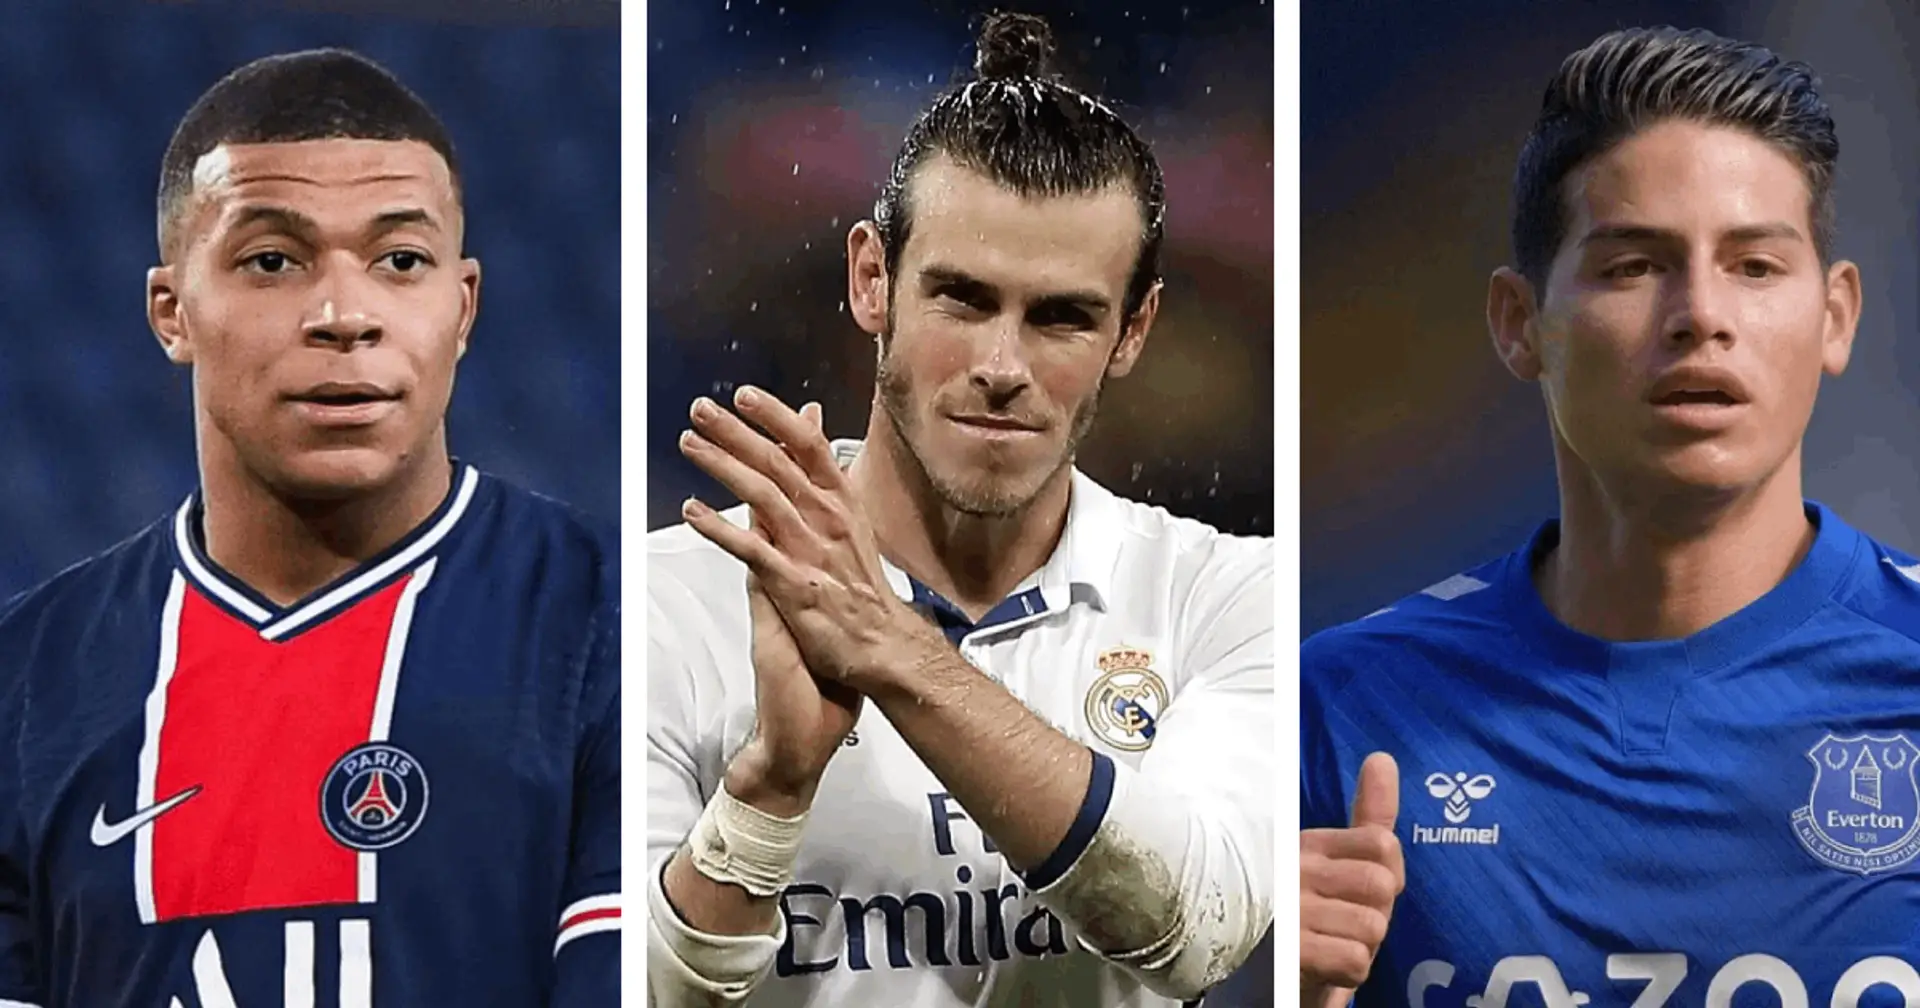 Bale, Mbappe and other names in latest Real Madrid transfer round-up with probability ratings